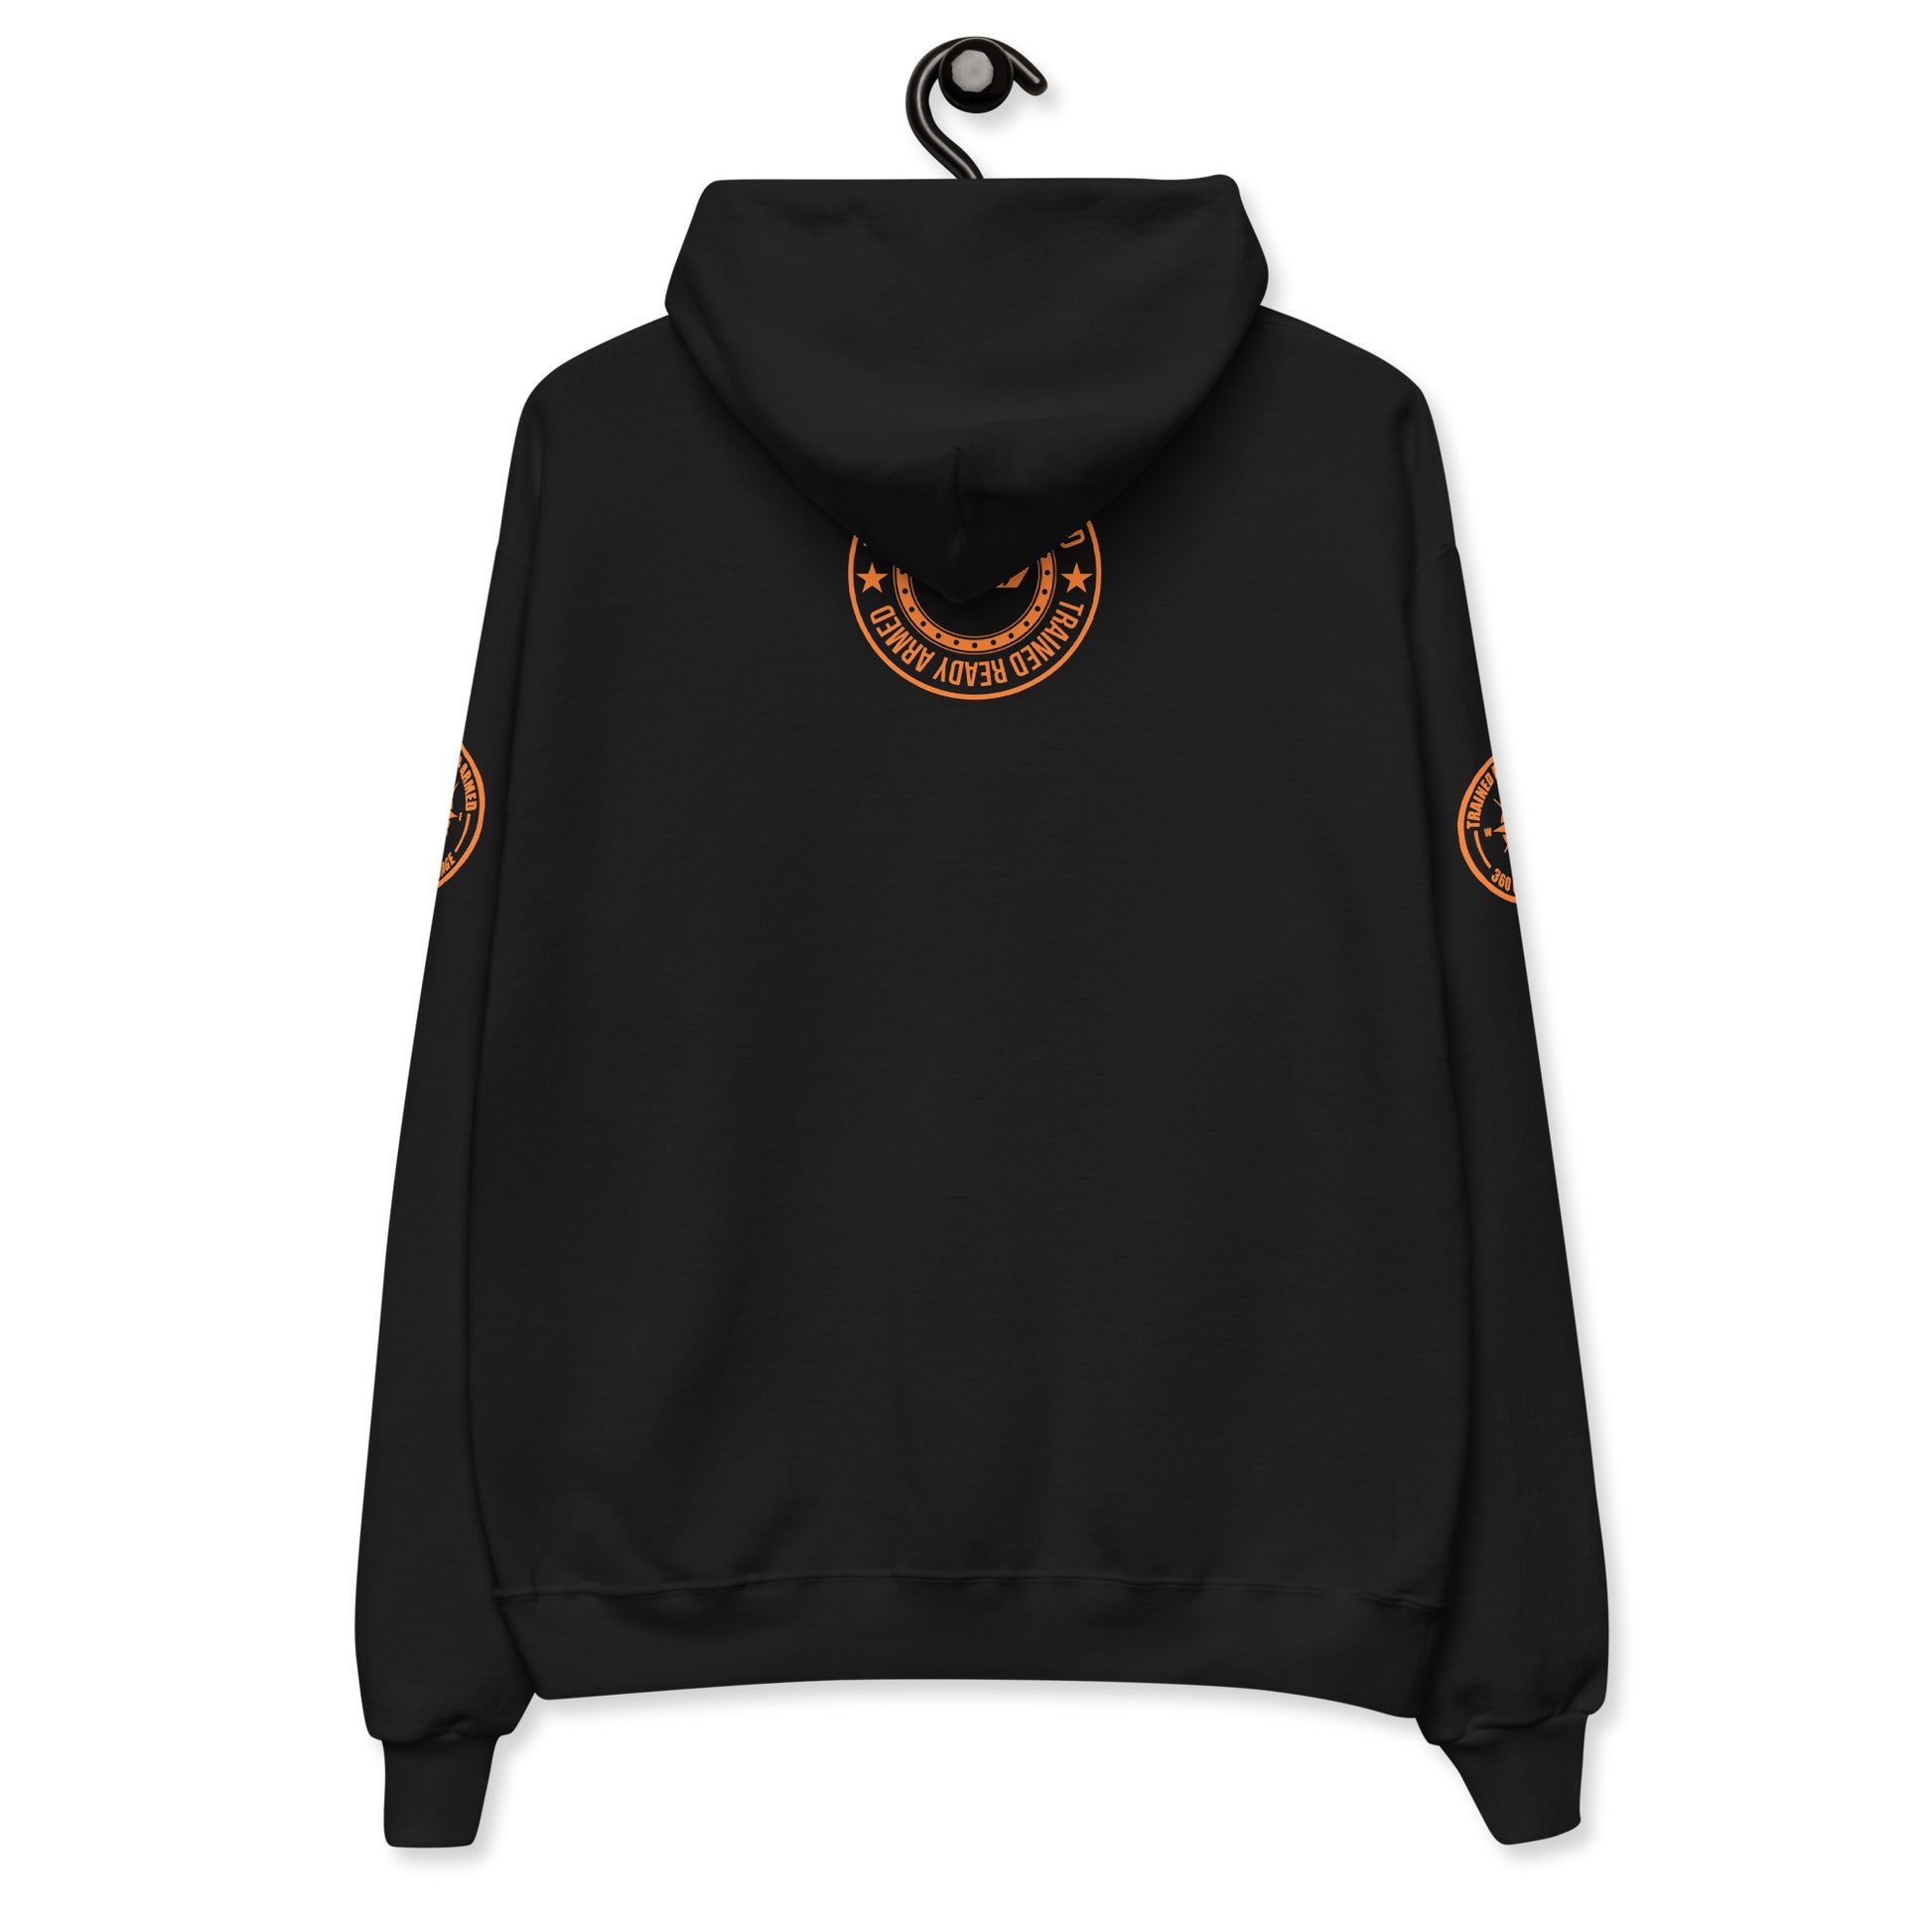 Trained Ready & Armed Premium Fleece Hoodie-BO - Trained Ready Armed Apparel